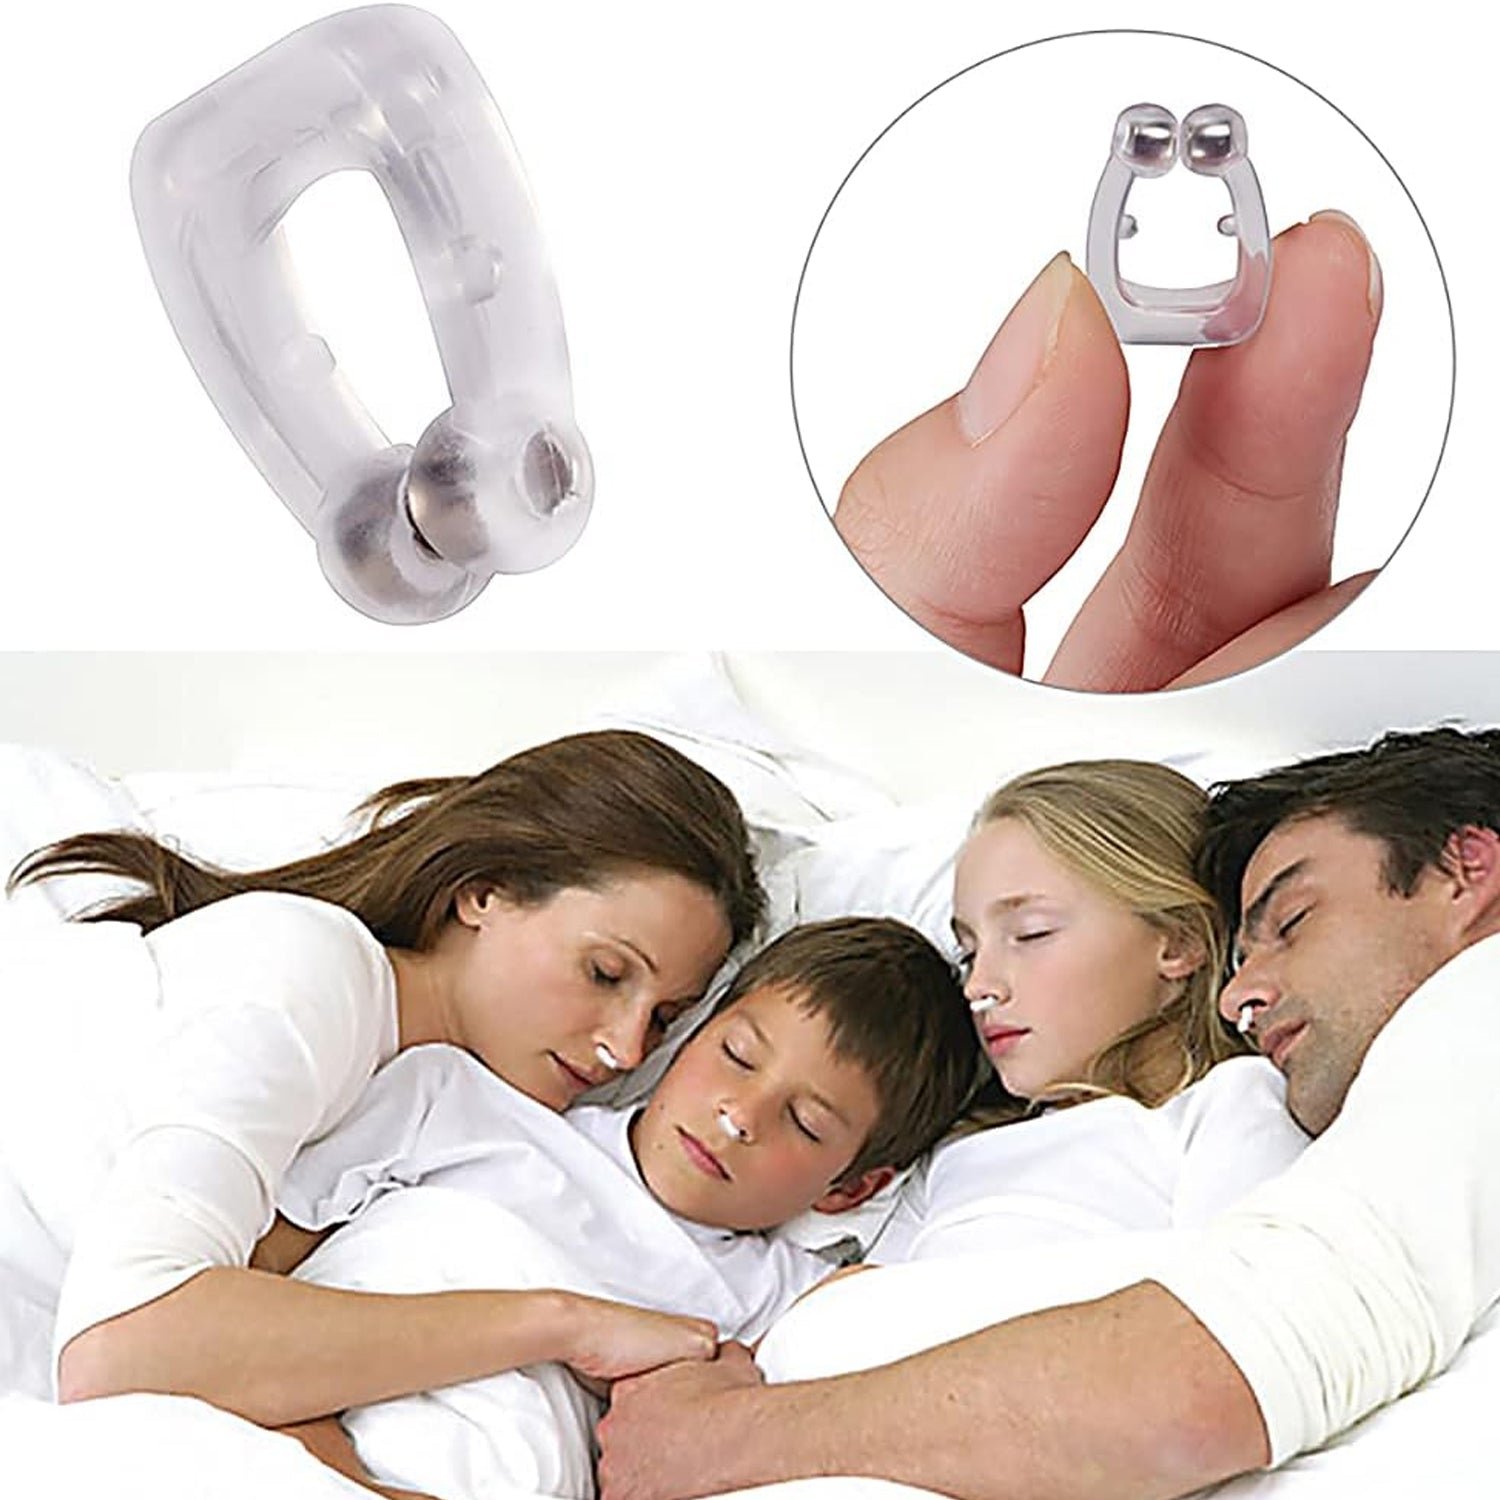 0349-anti-snore-device-for-men-and-woman-silicone-magnetic-nose-clip-for-heavy-snoring-sleeper-snore-stopper-anti-snoring-device-1-pc